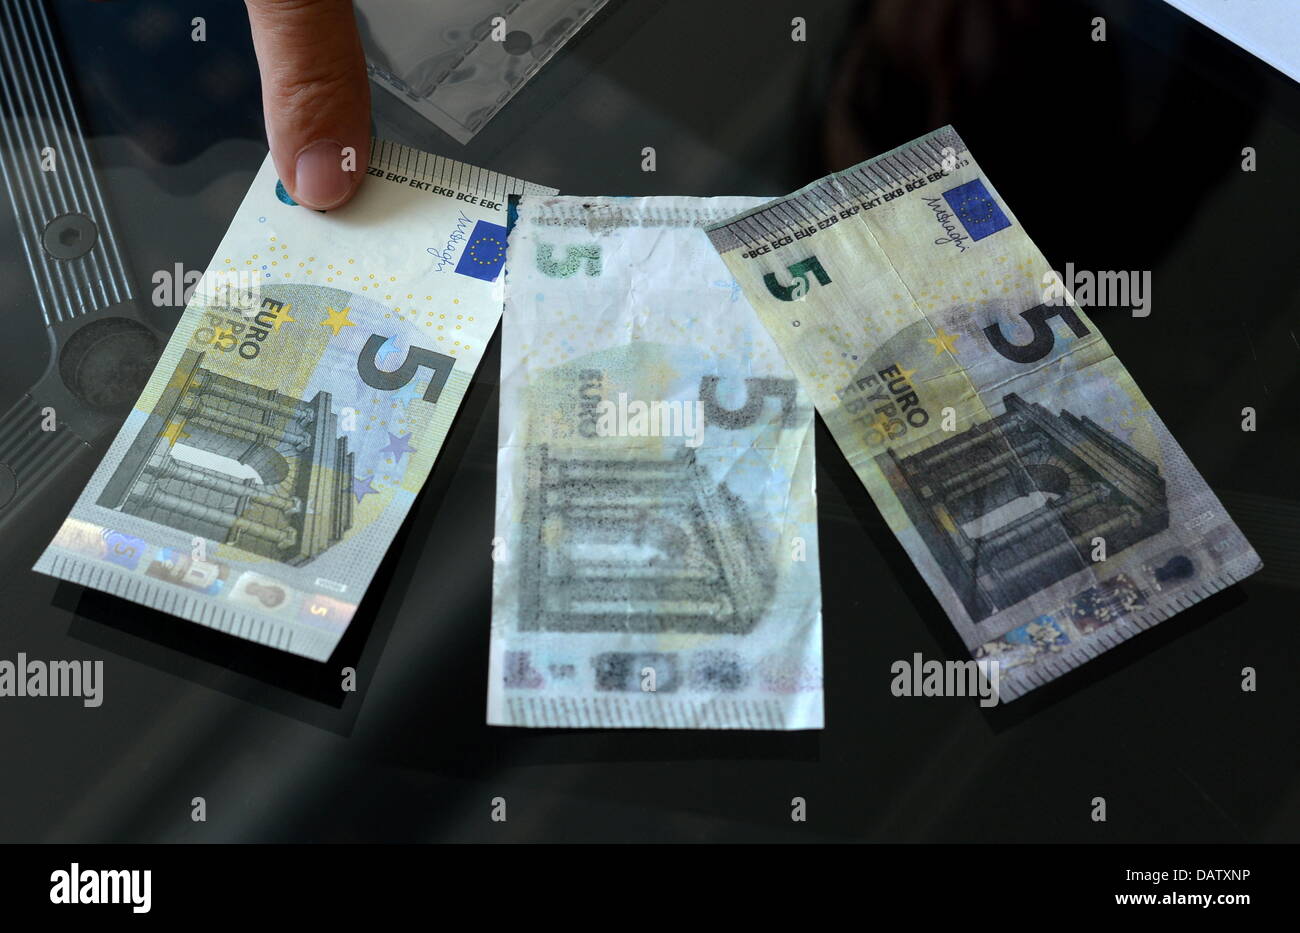 5 Euro banknote(First series)